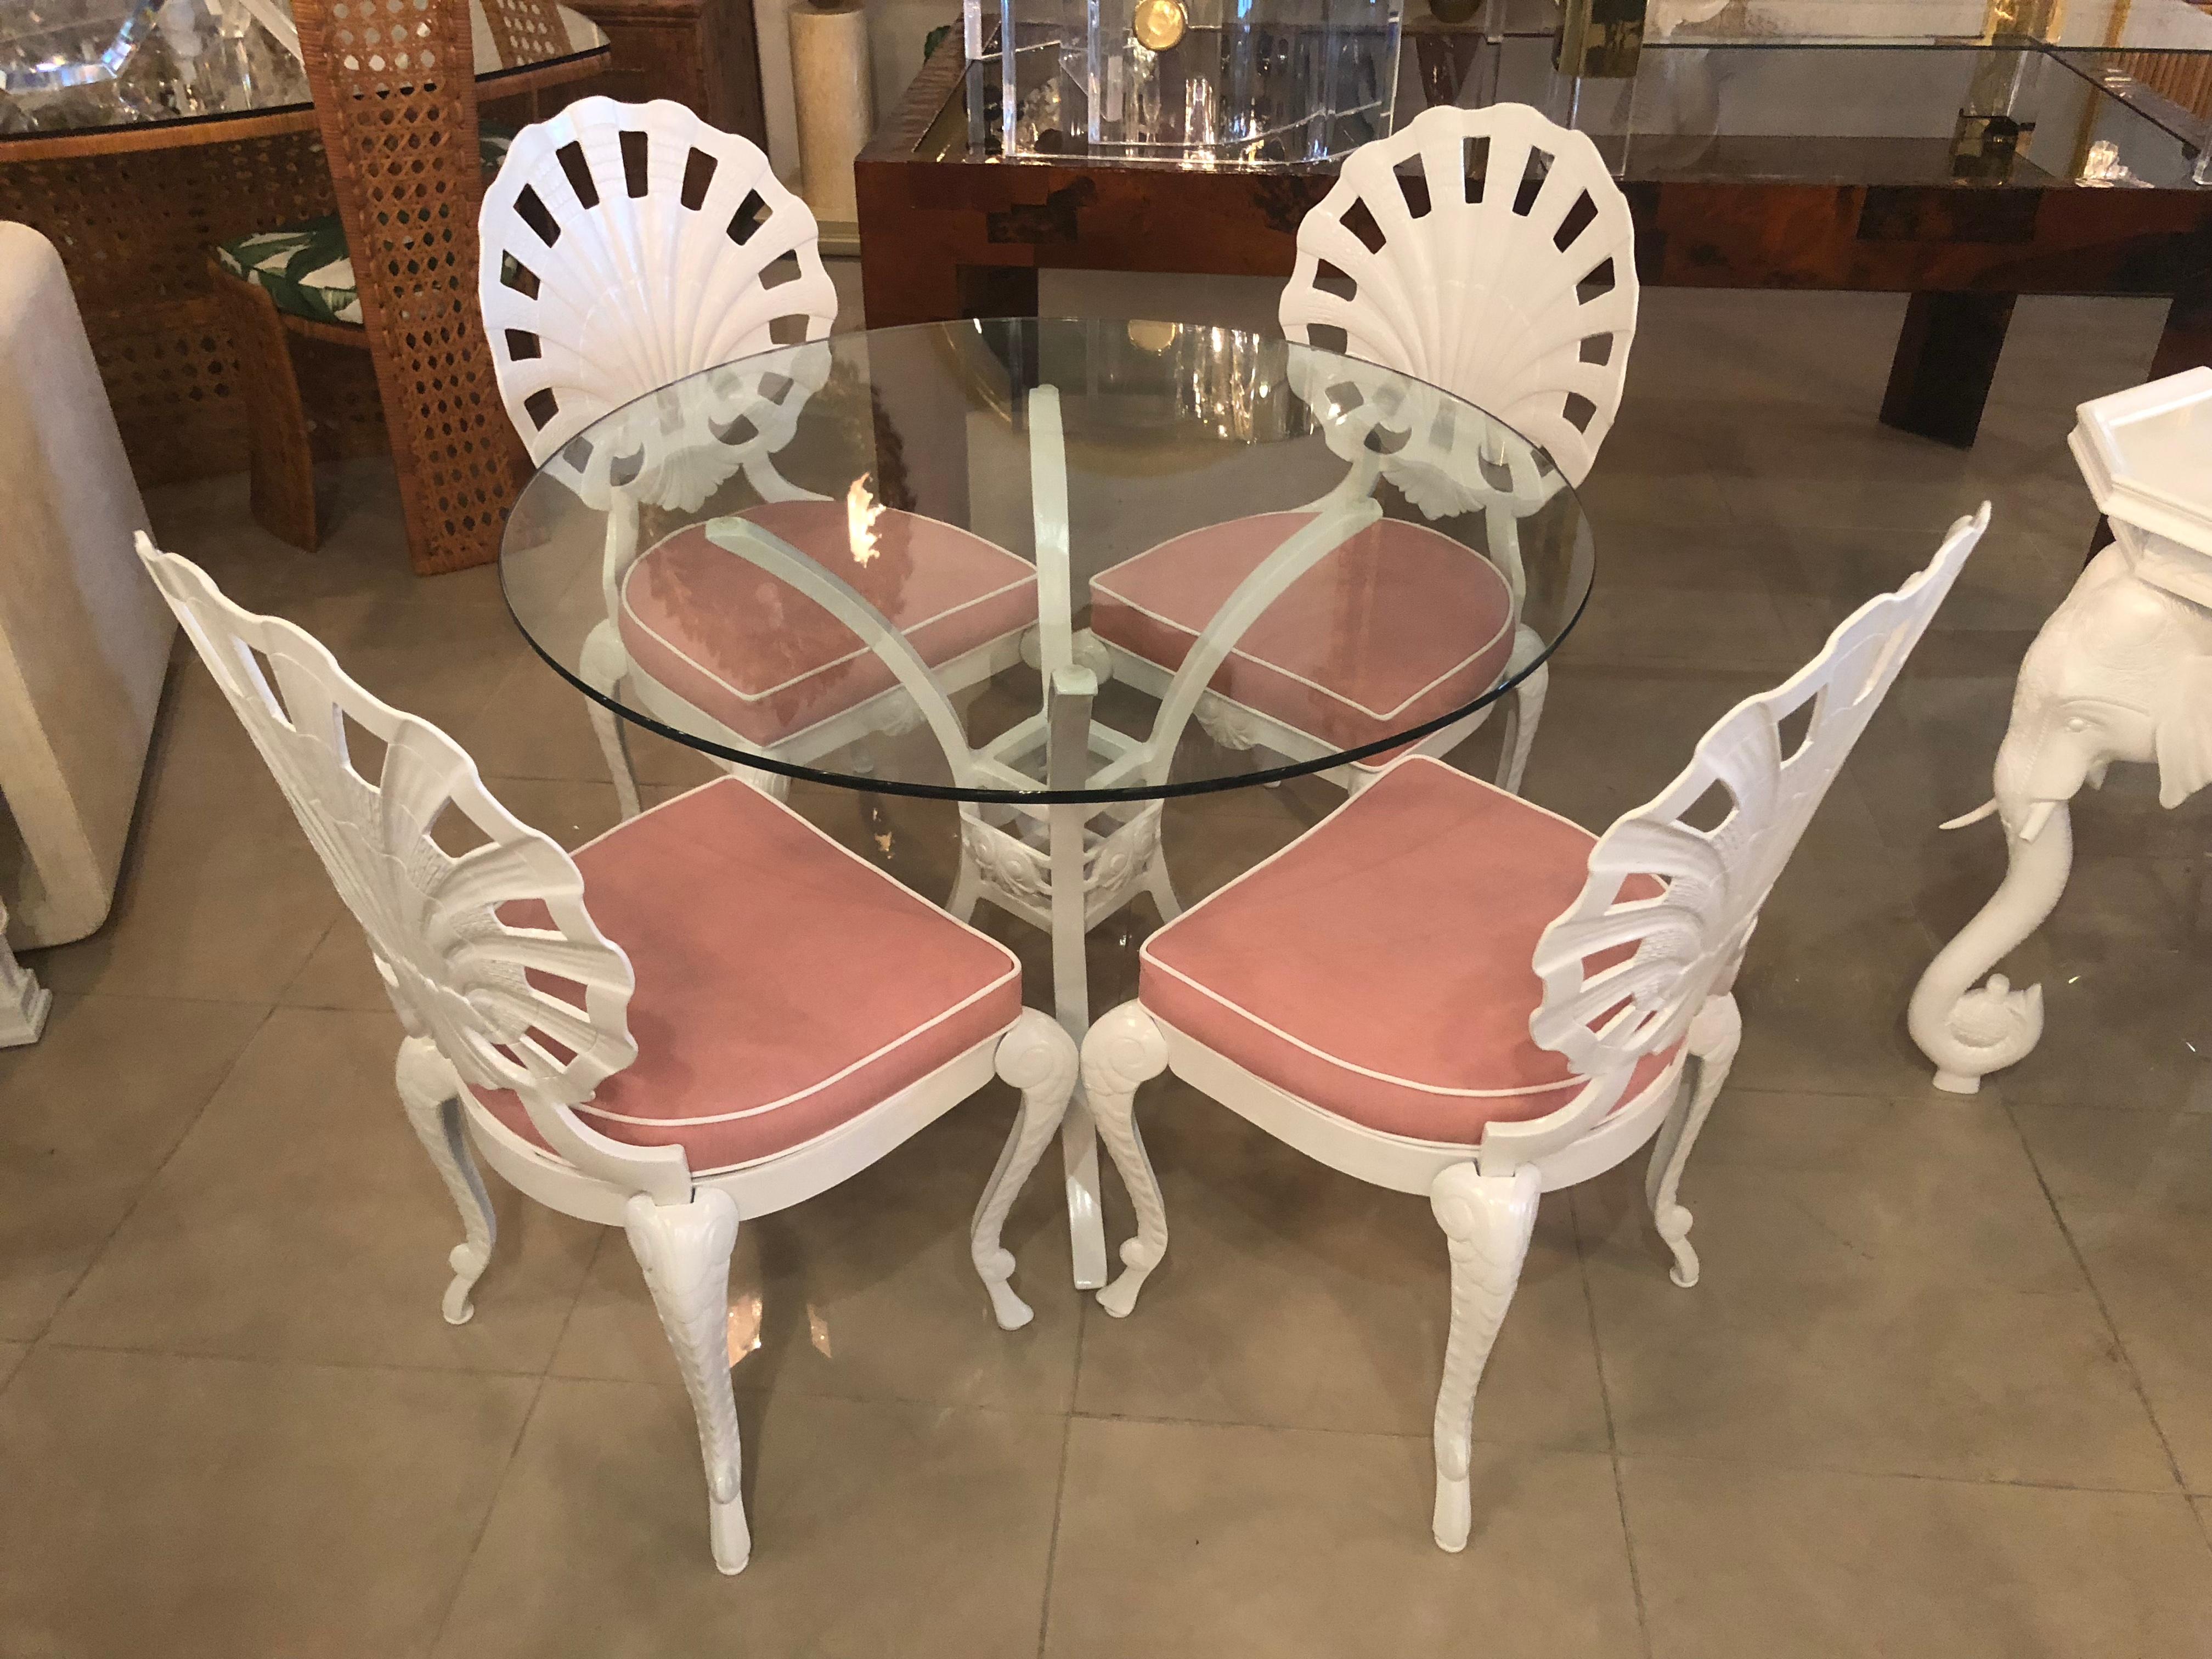 Vintage Brown Jordan Grotto 5-piece patio set which includes 4 dining chairs, table base, and round glass. The glass is original and may have some scratches. The glass can also be larger if needed. This set has been professionally powder coated in a